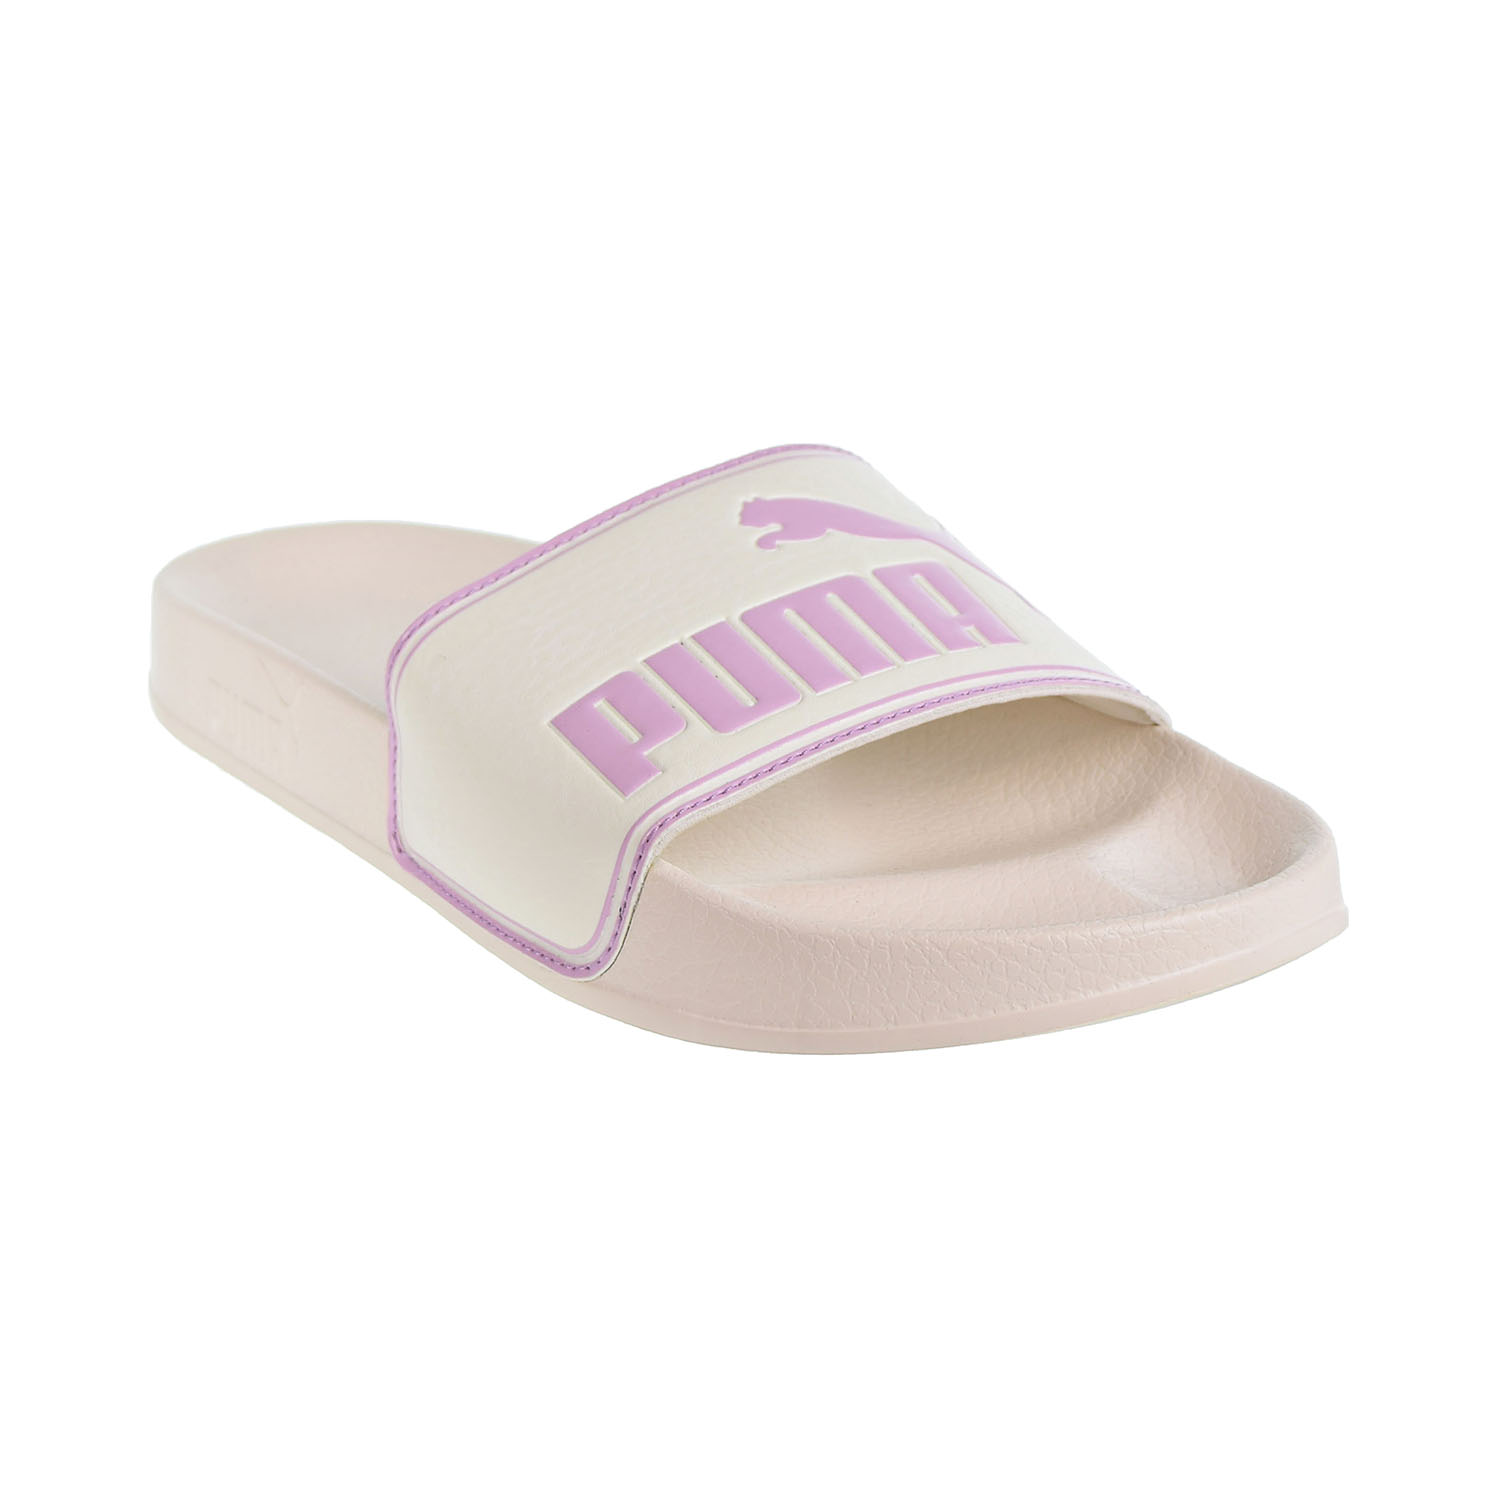 Puma Leadcat Big Kids/Men's Sandals Whisper White/Winsome Orchid 360263-12 - image 1 of 6